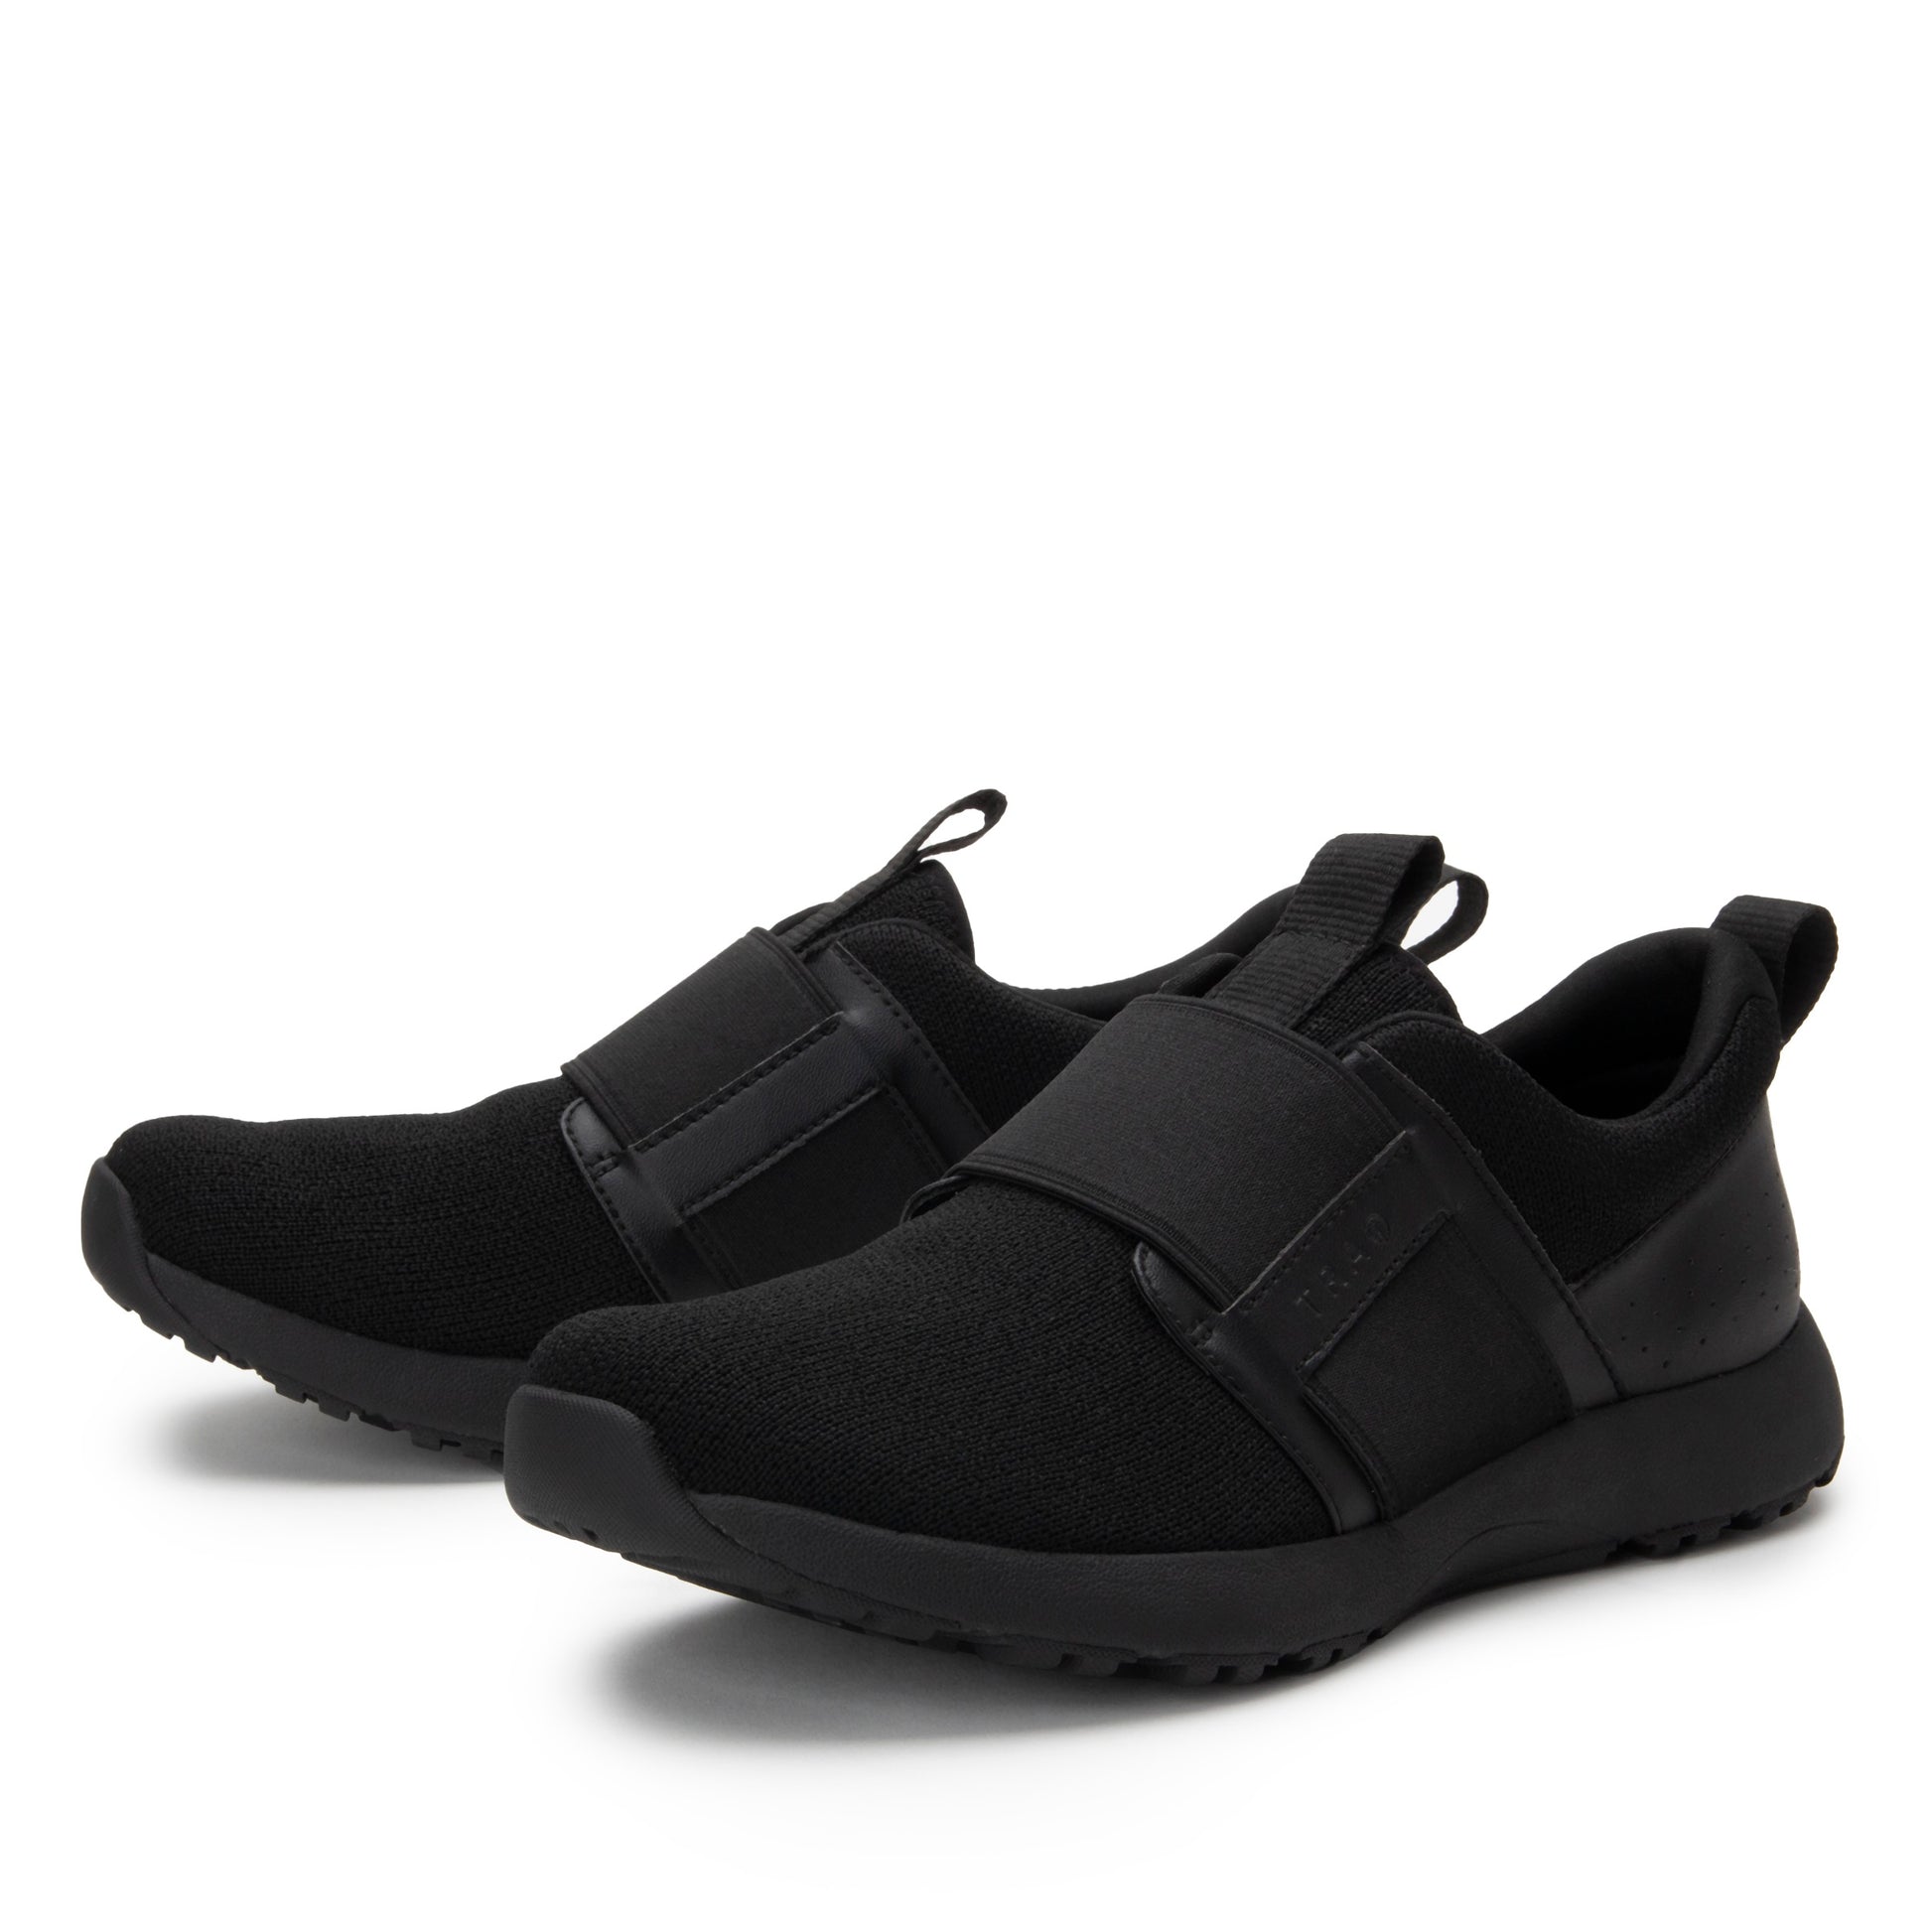 Traq Volition Slip On Sneakers by Alegria in Black at Parker's Clothing and Shoes.